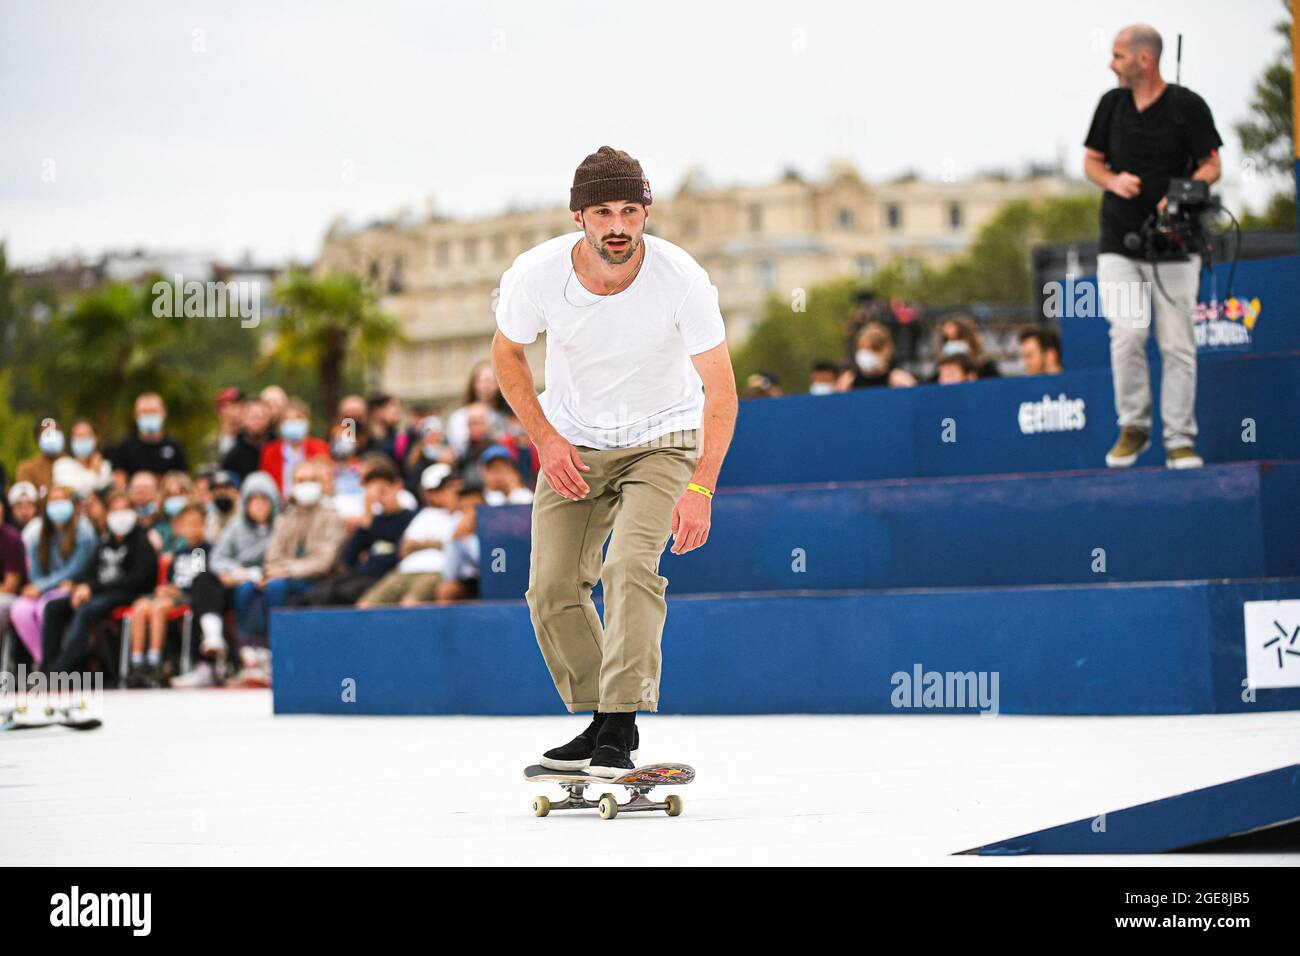 Paris, France. August 17, 2021, Vladik Scholz of Germany competes during  the qualification day of the Red Bull Paris Conquest, where some of the  best street skaters in the world compete head-to-head